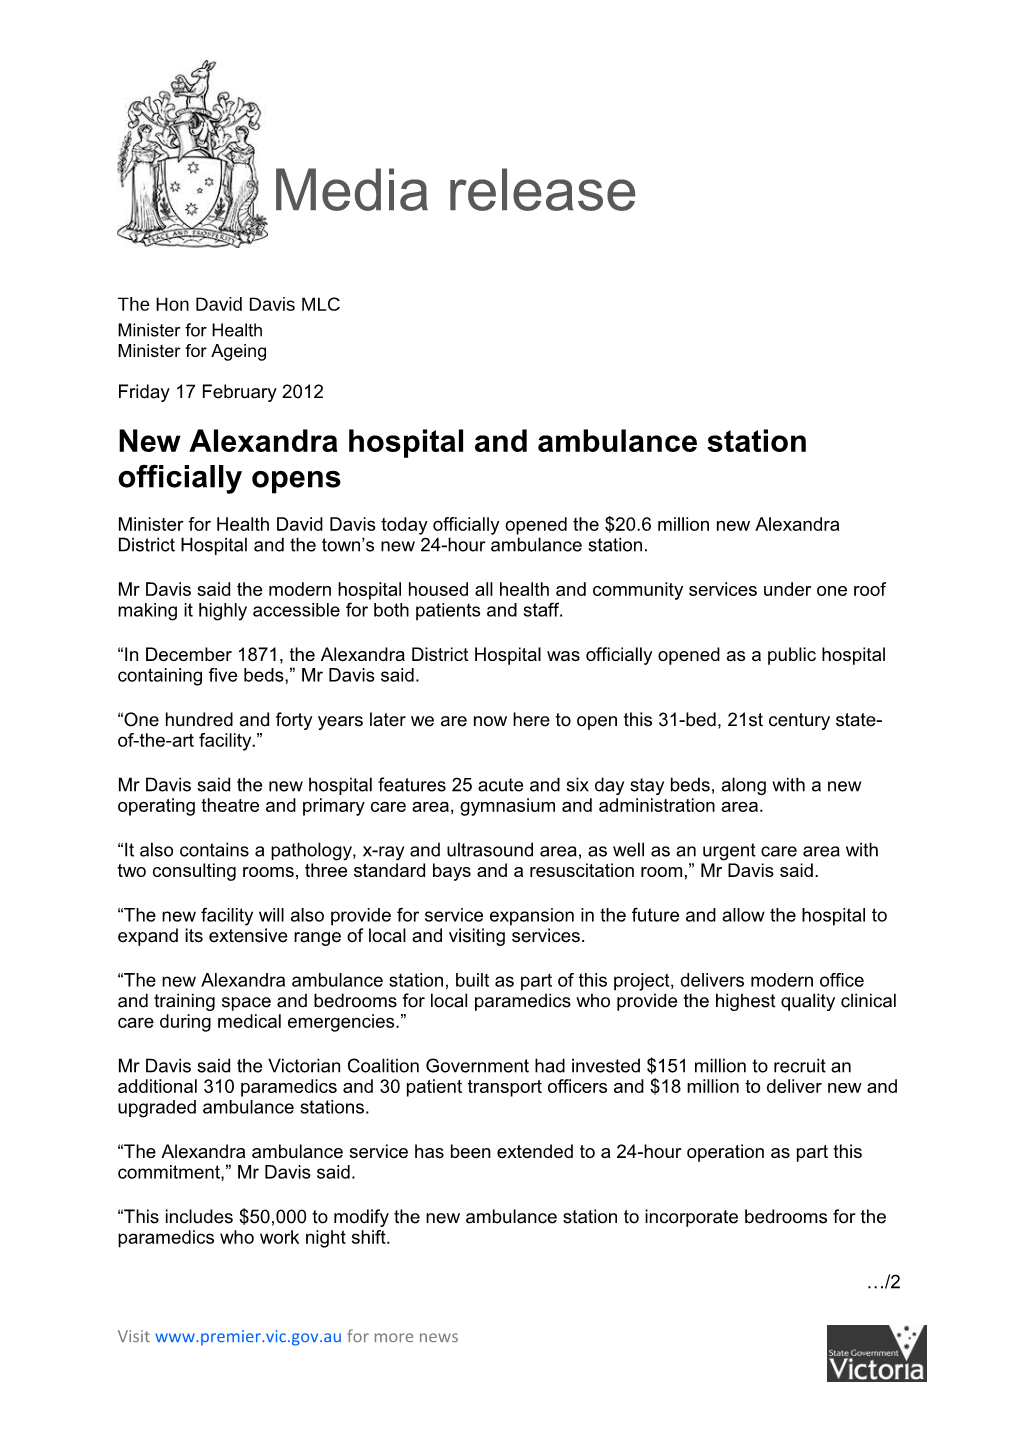 New Alexandra Hospital and Ambulance Station Officially Opens